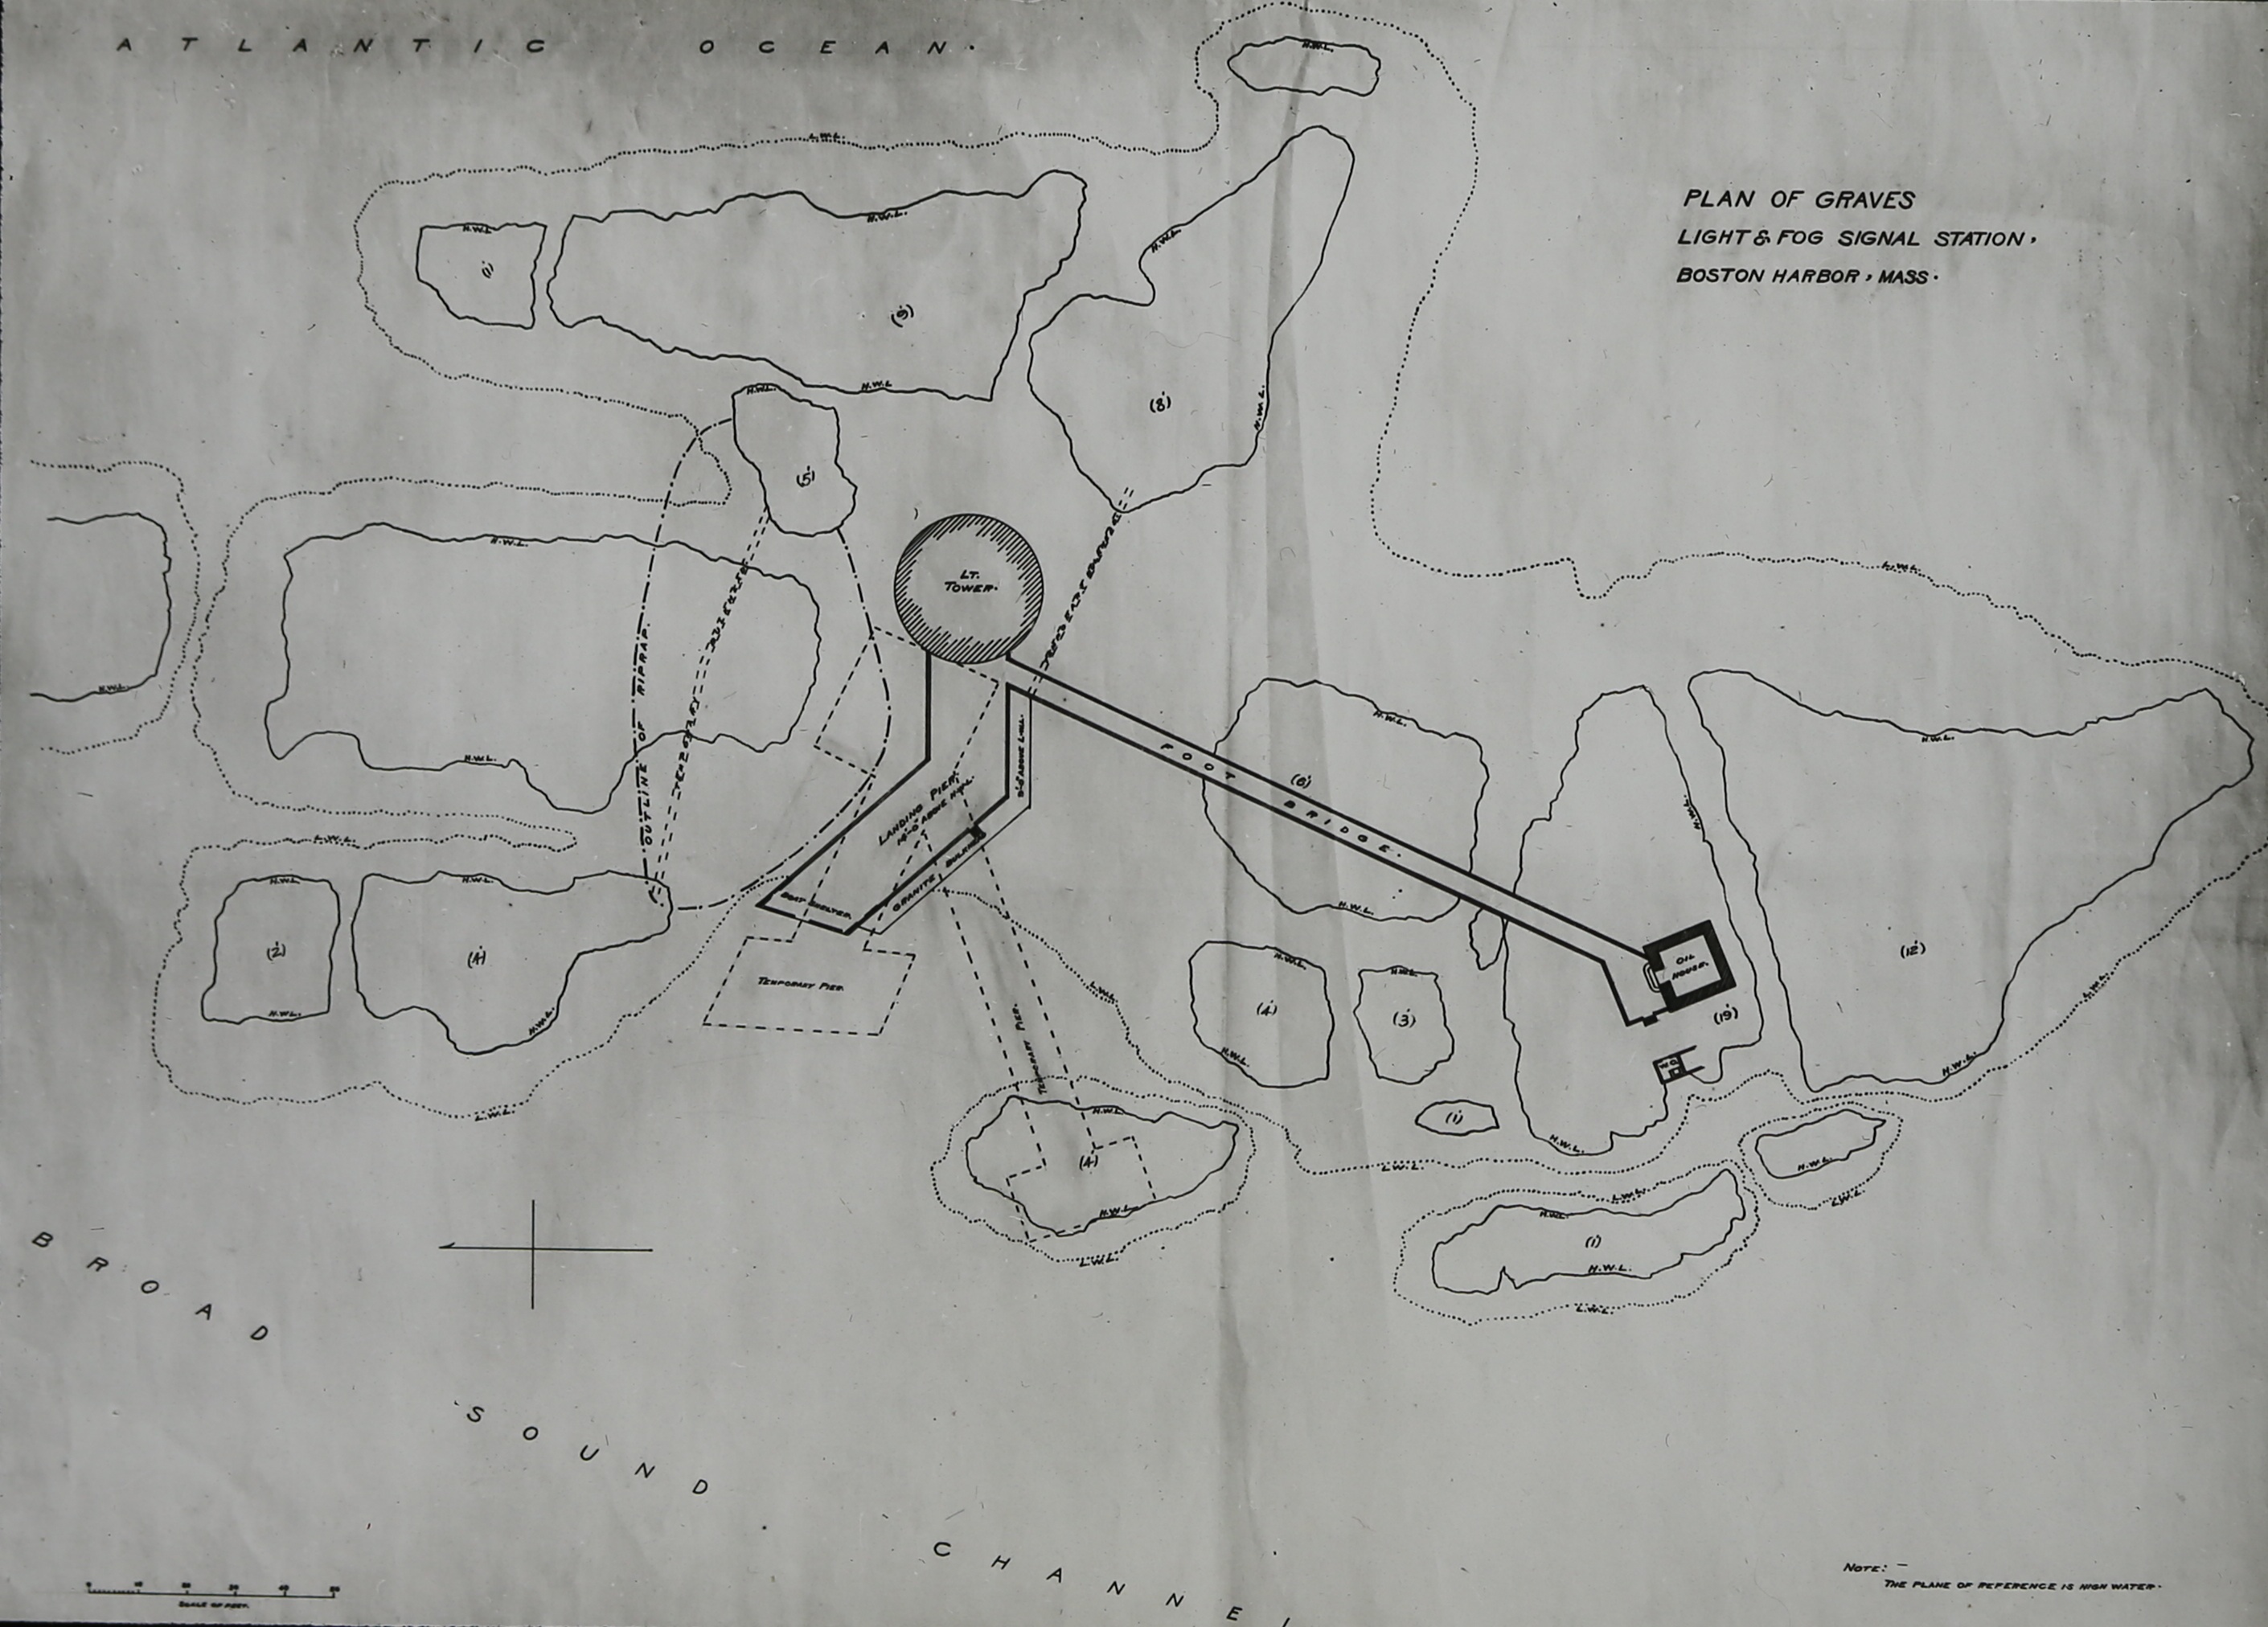 An image of the original Army engineers' plan for building the lighthouse and oil house on  Graves Ledge, joined by a 90-foot elevated catwalk. (Photo courtesy of the Massachusetts Historical Society)